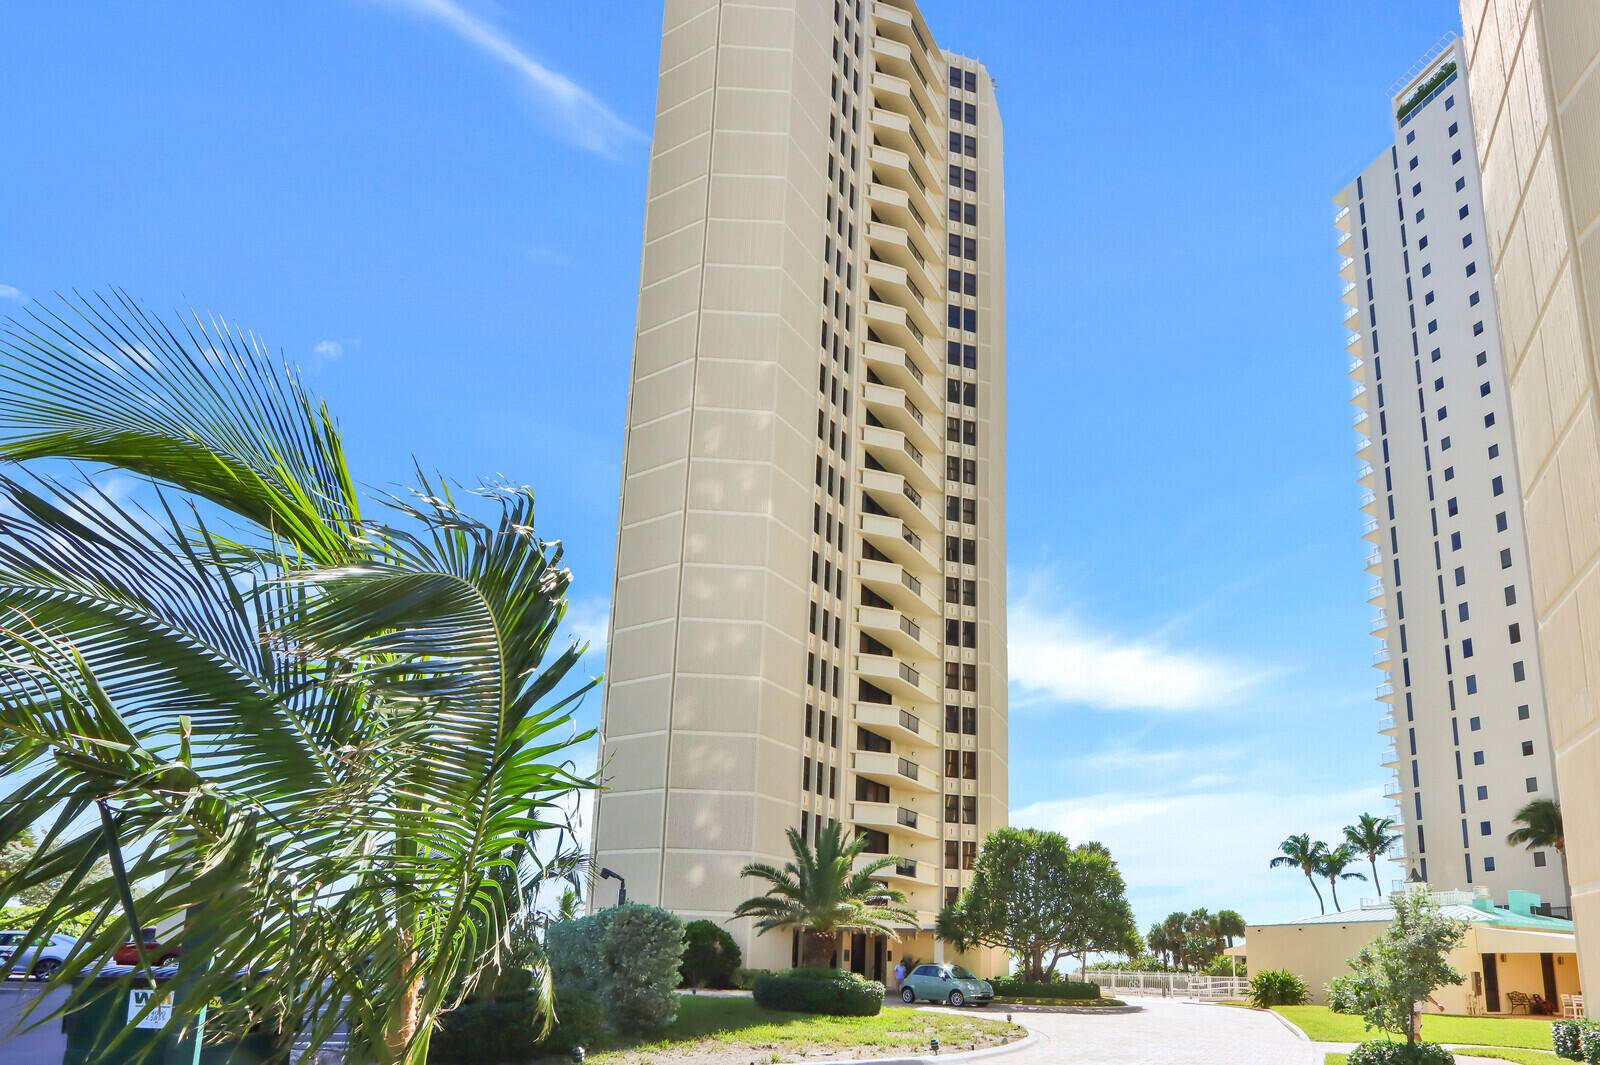 SEASONAL RENTAL Phoenix Towers 2 2 Great location, views of the ocean from balcony and rooms.